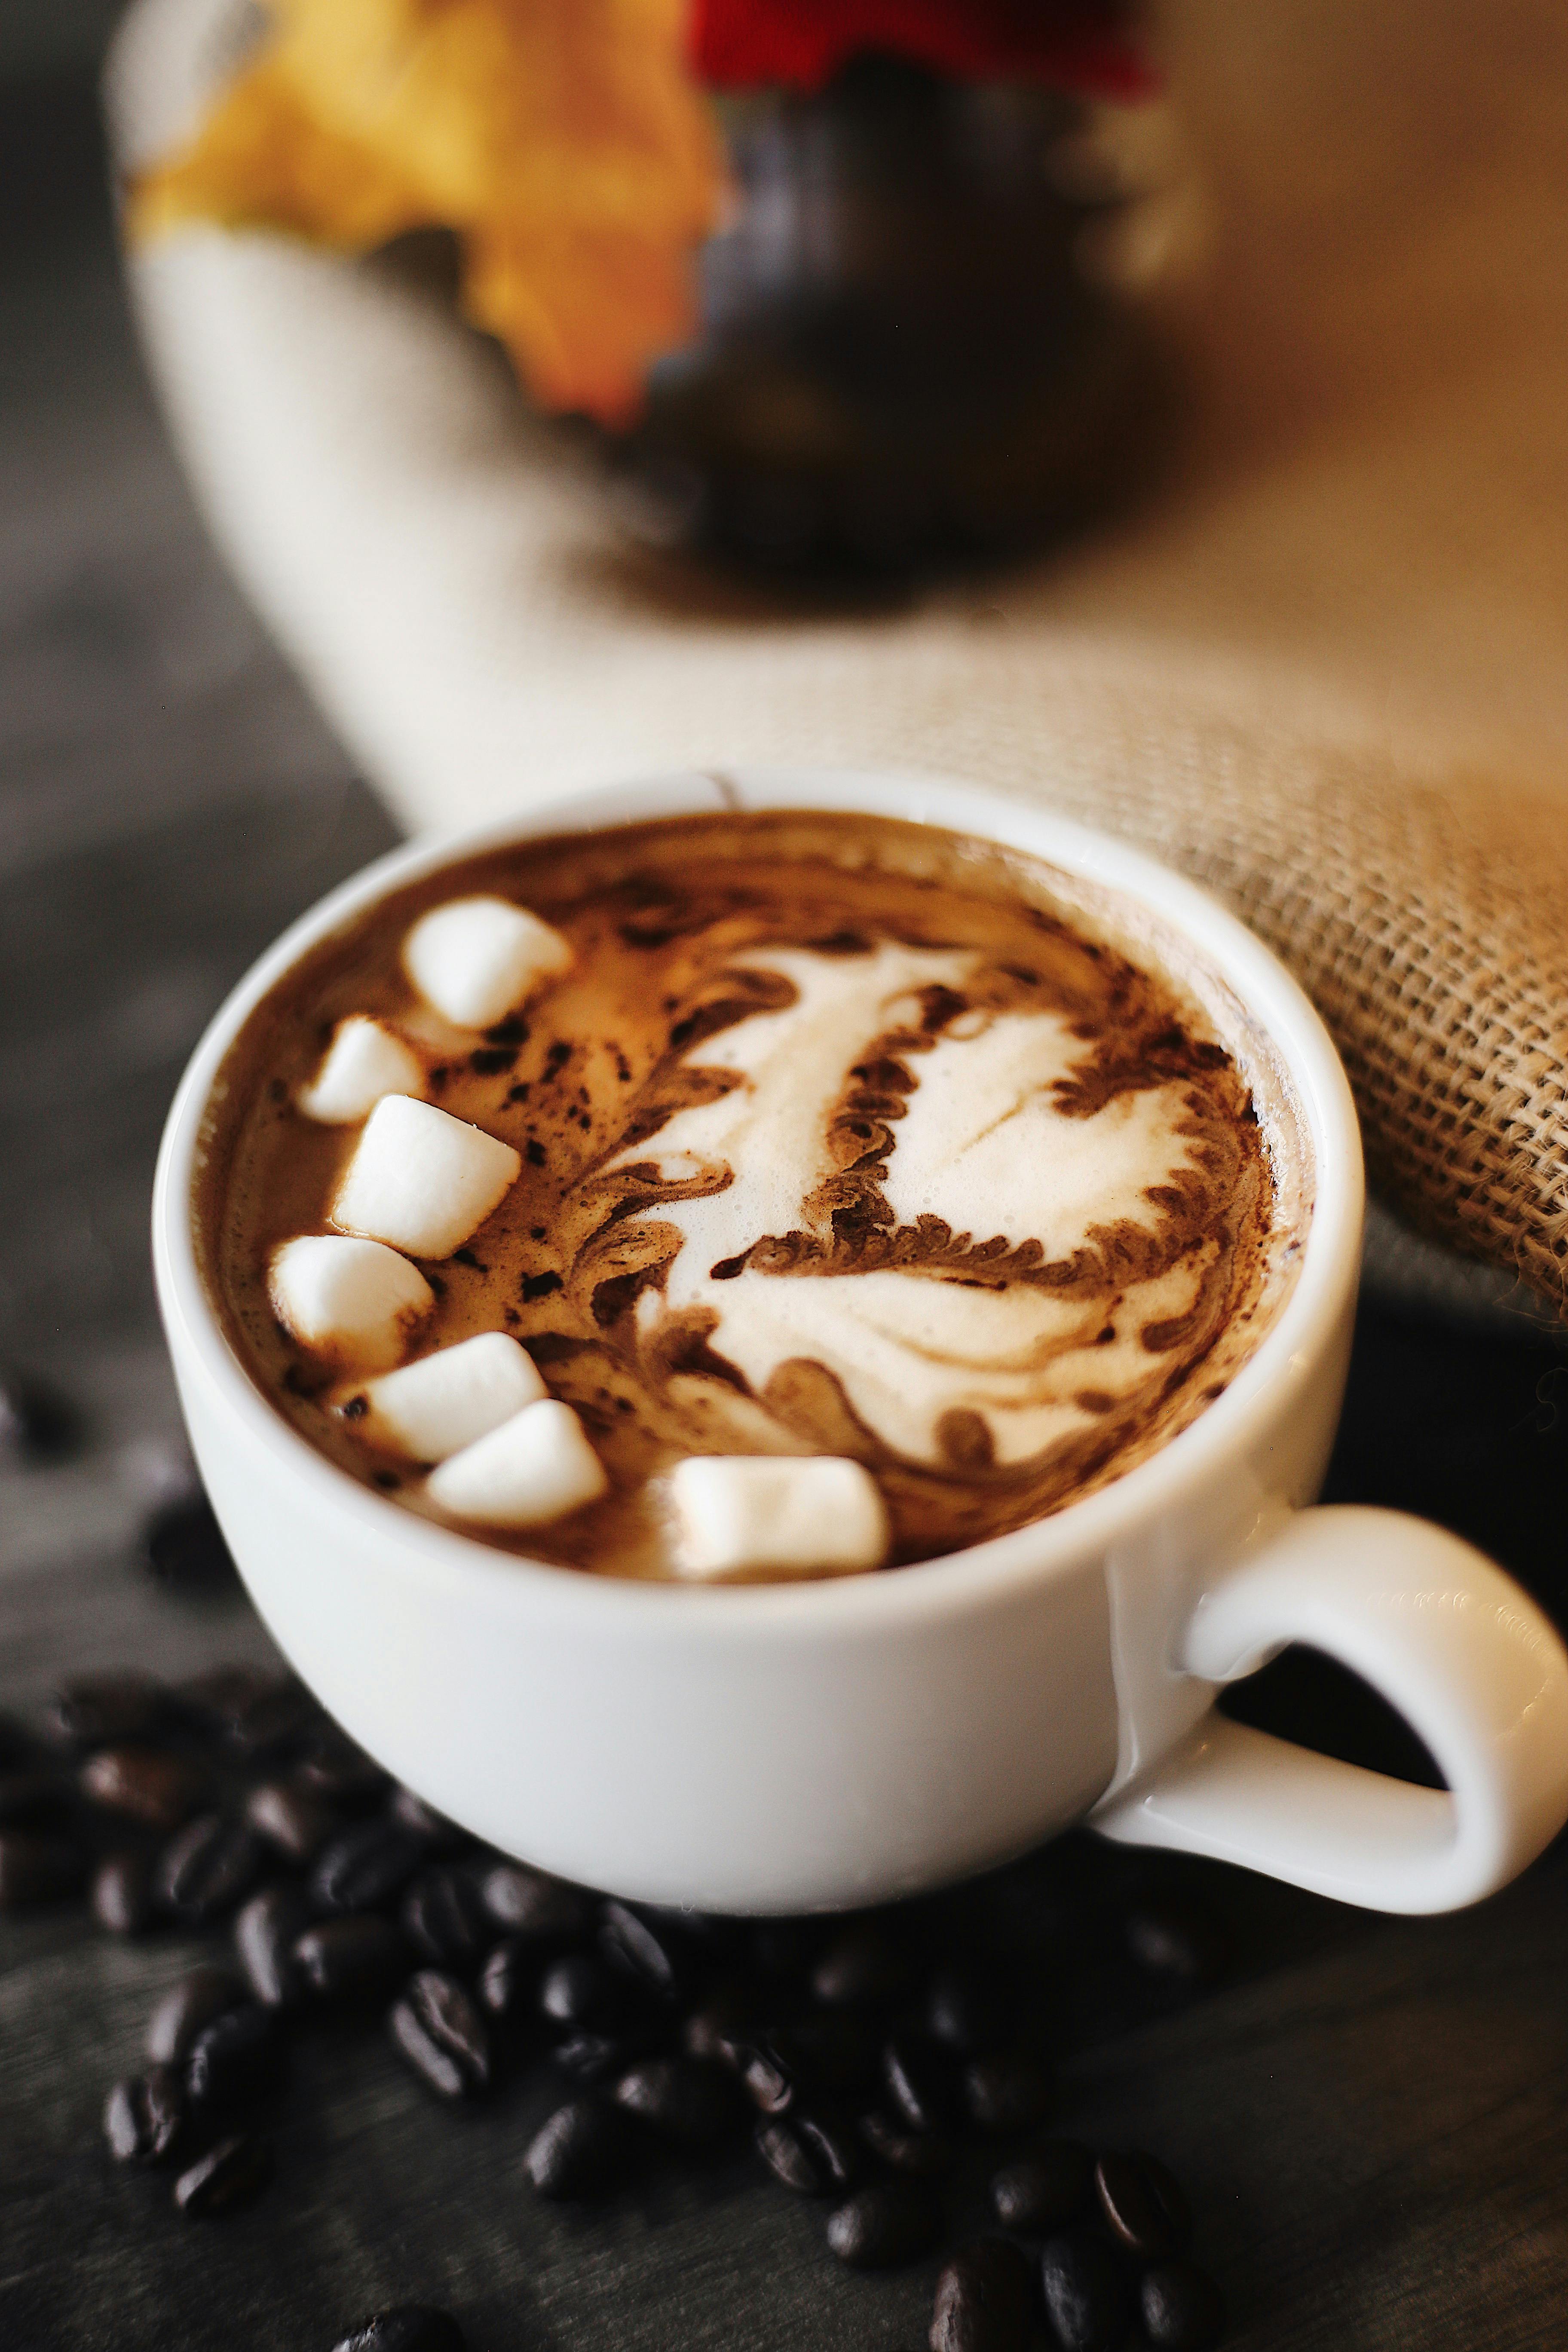 Some Hot Cocoa Products Found to Have Toxic Metals